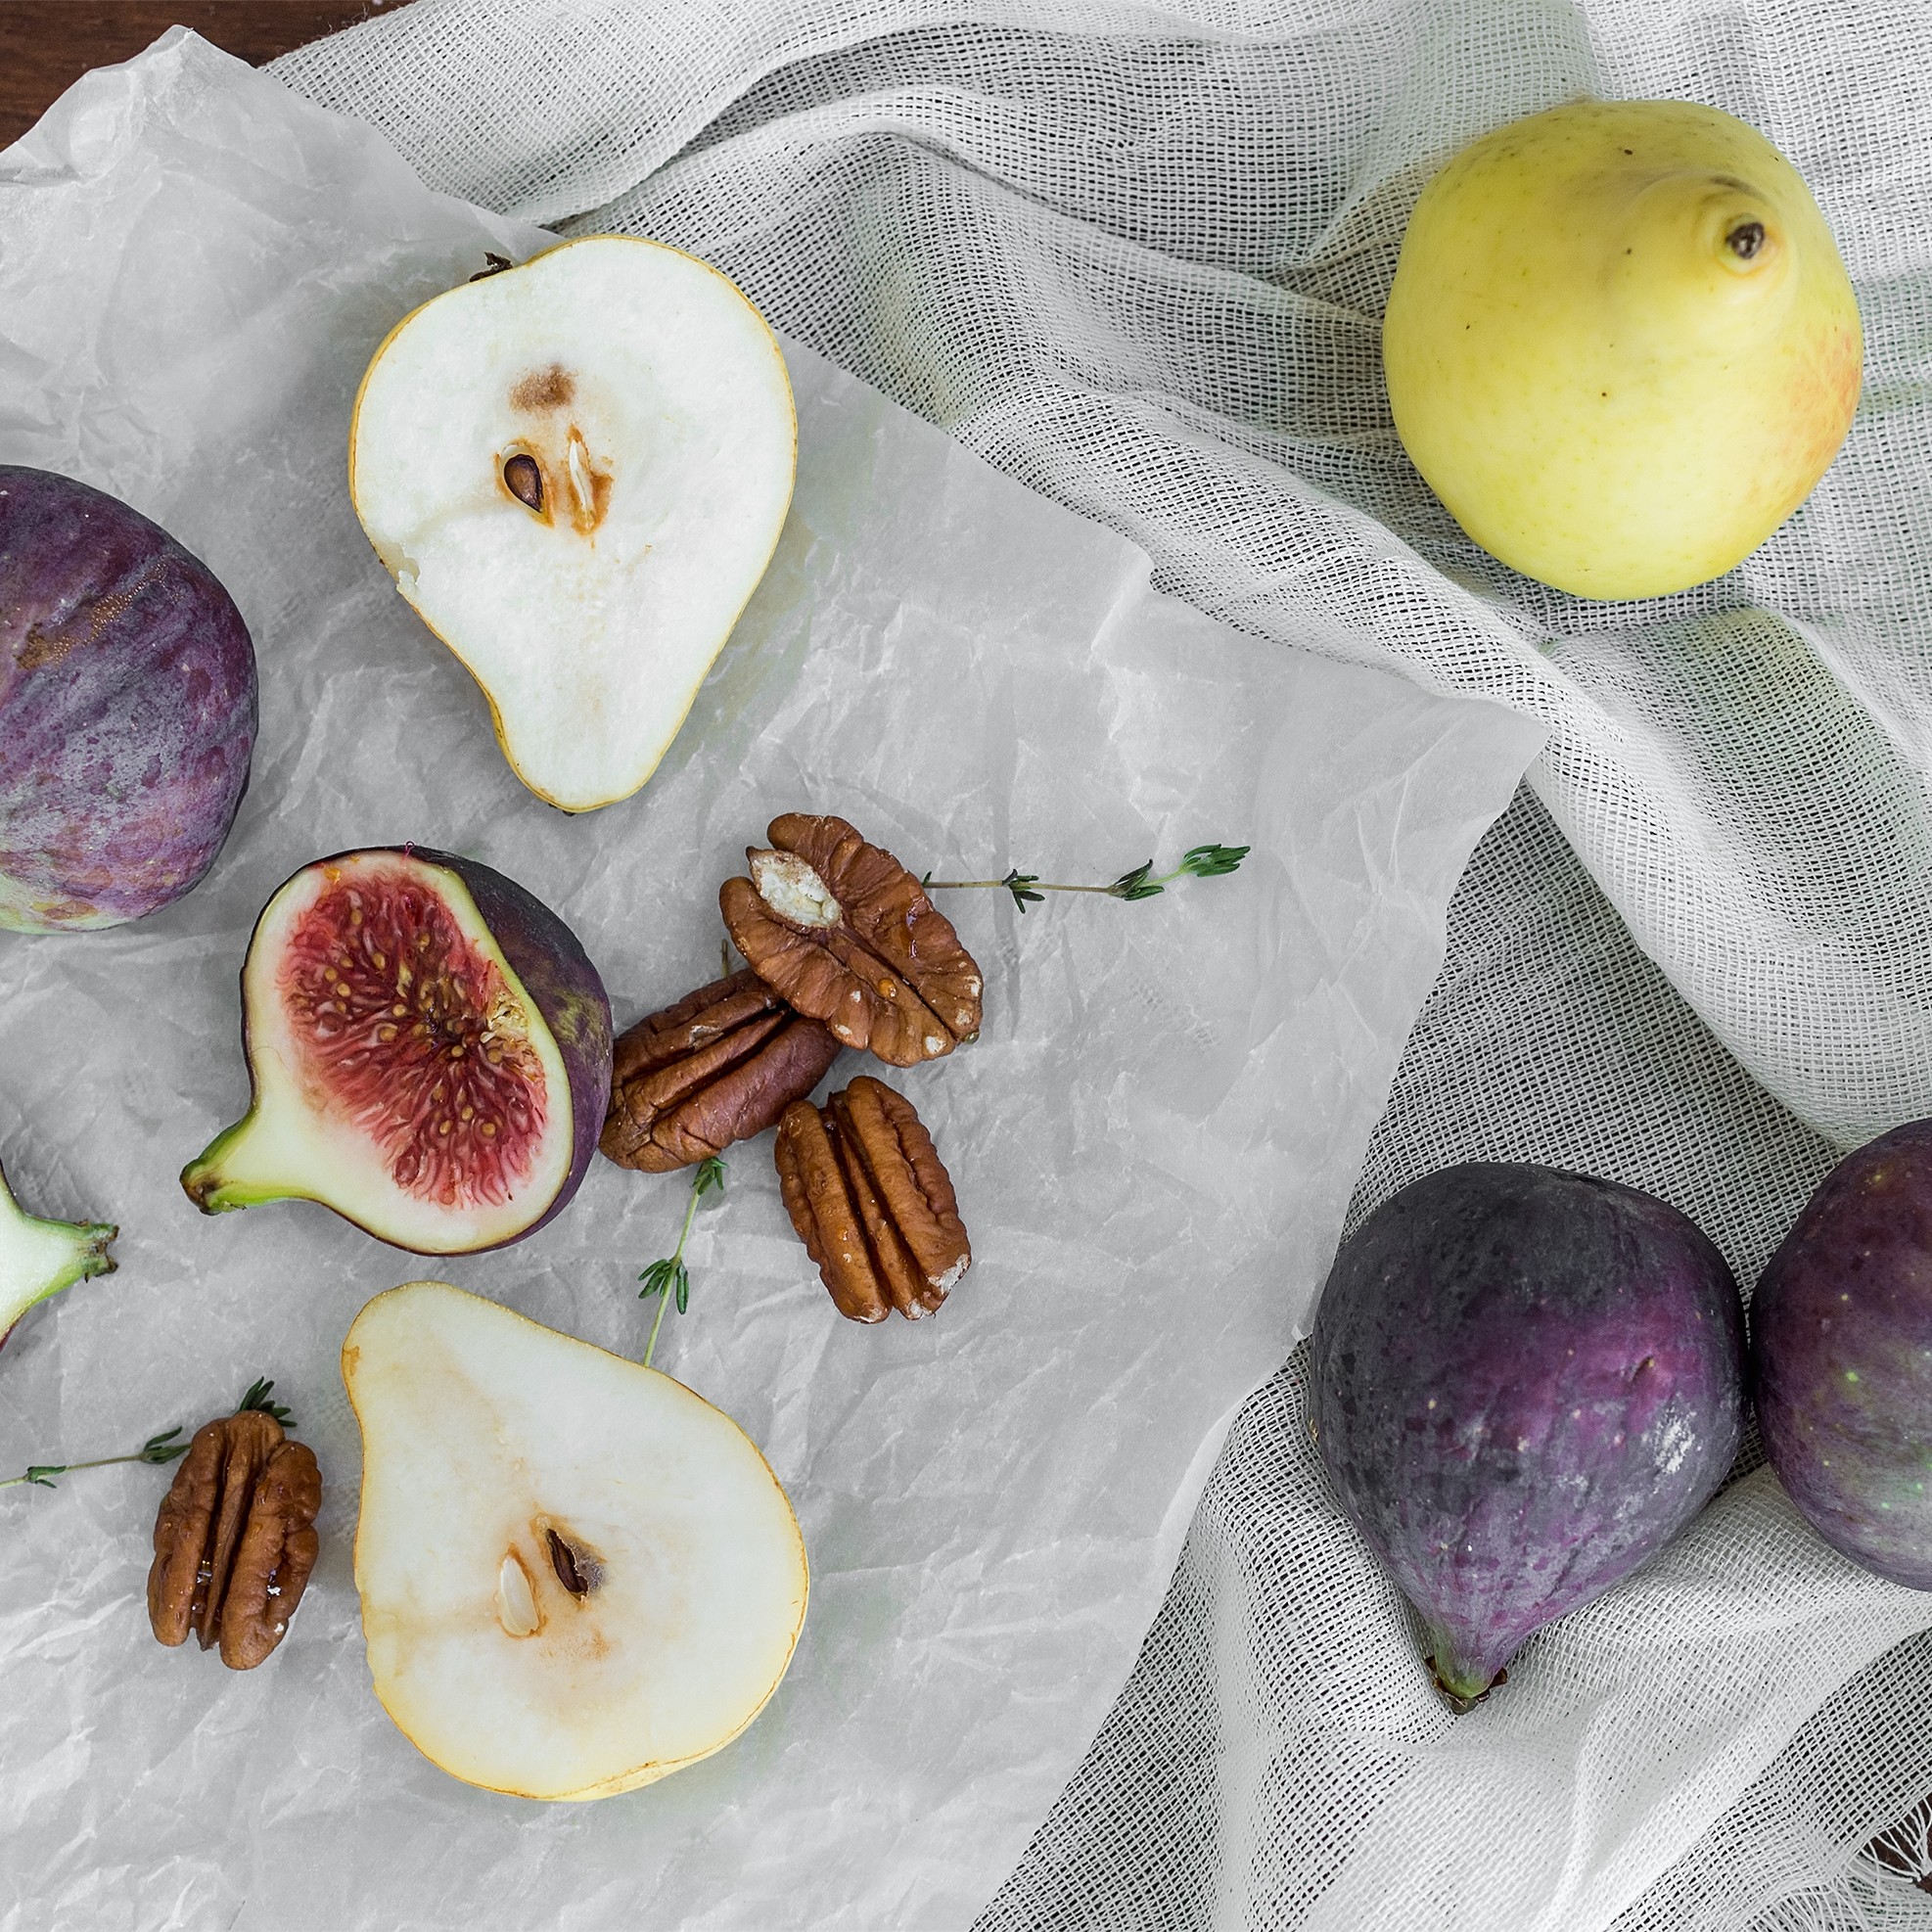 Figs and pears that have been cut open are laying on a cutting board